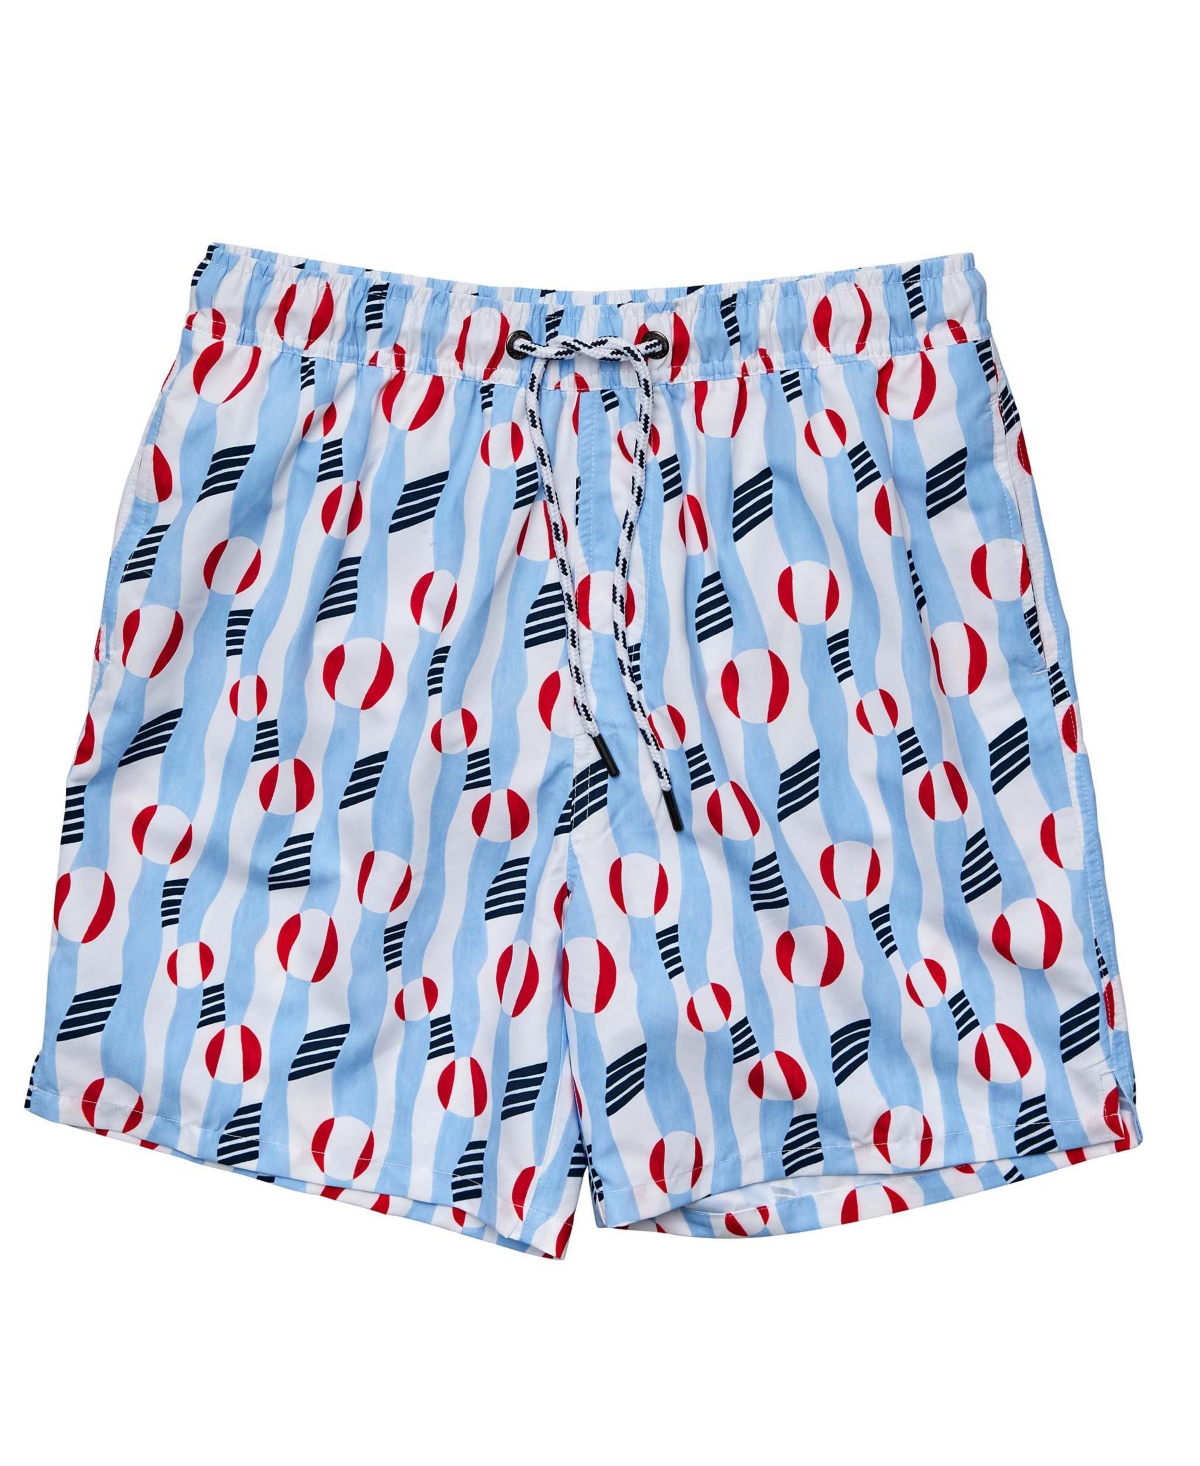 Men's Beach Bounce Sustainable Volley Board Short - Blue